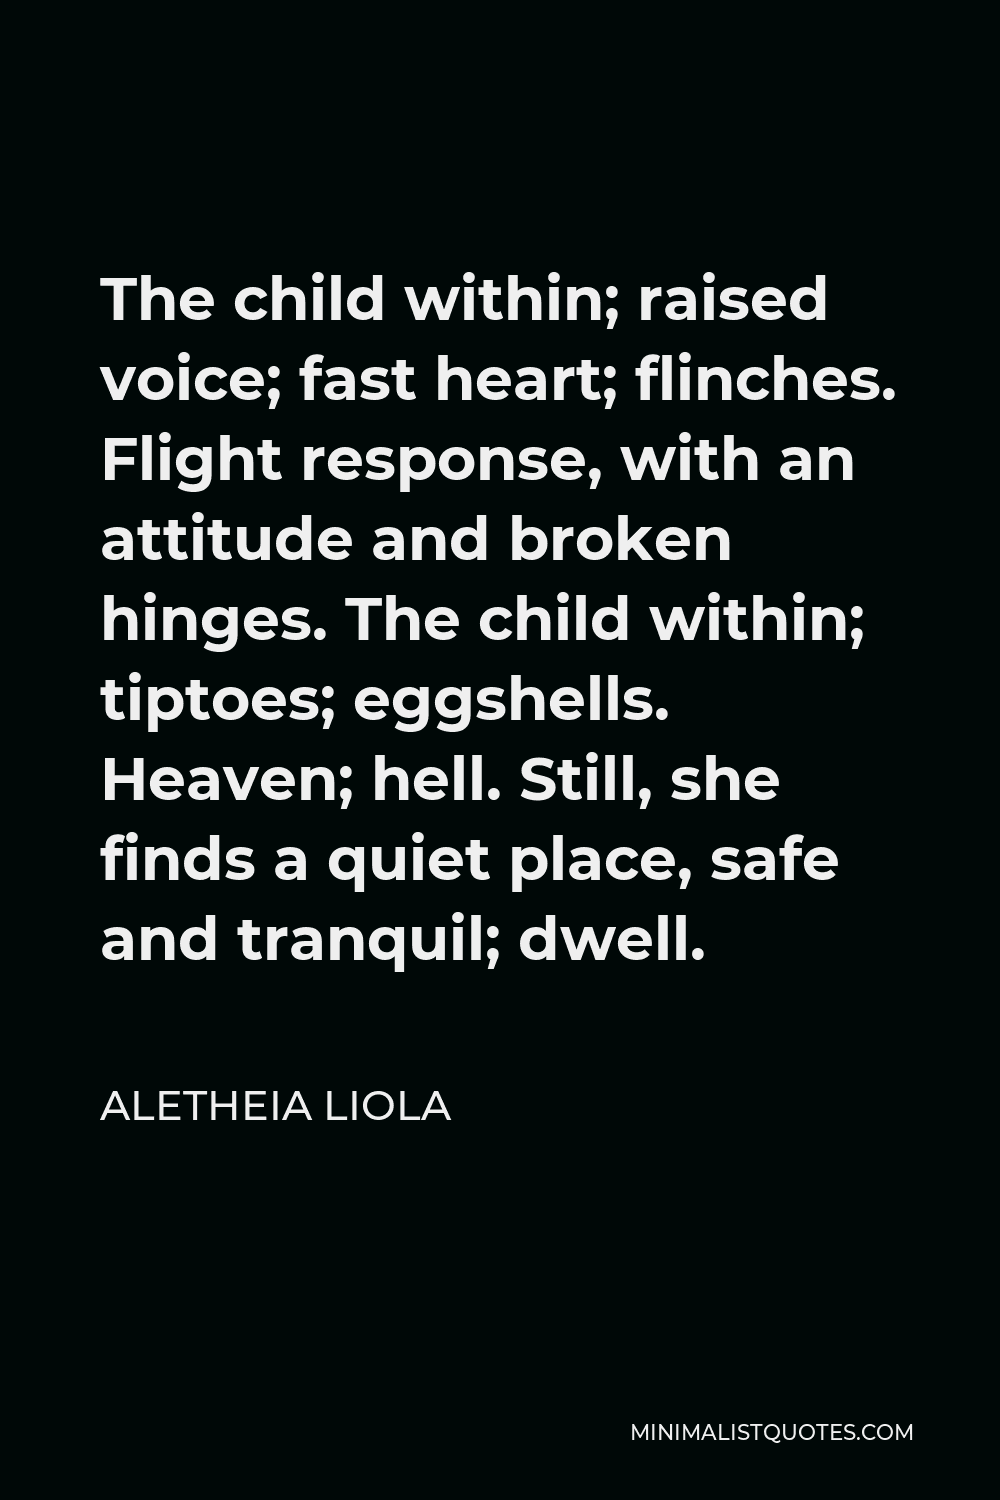 Aletheia Liola Quote - The child within; raised voice; fast heart; flinches. Flight response, with an attitude and broken hinges. The child within; tiptoes; eggshells. Heaven; hell. Still, she finds a quiet place, safe and tranquil; dwell.